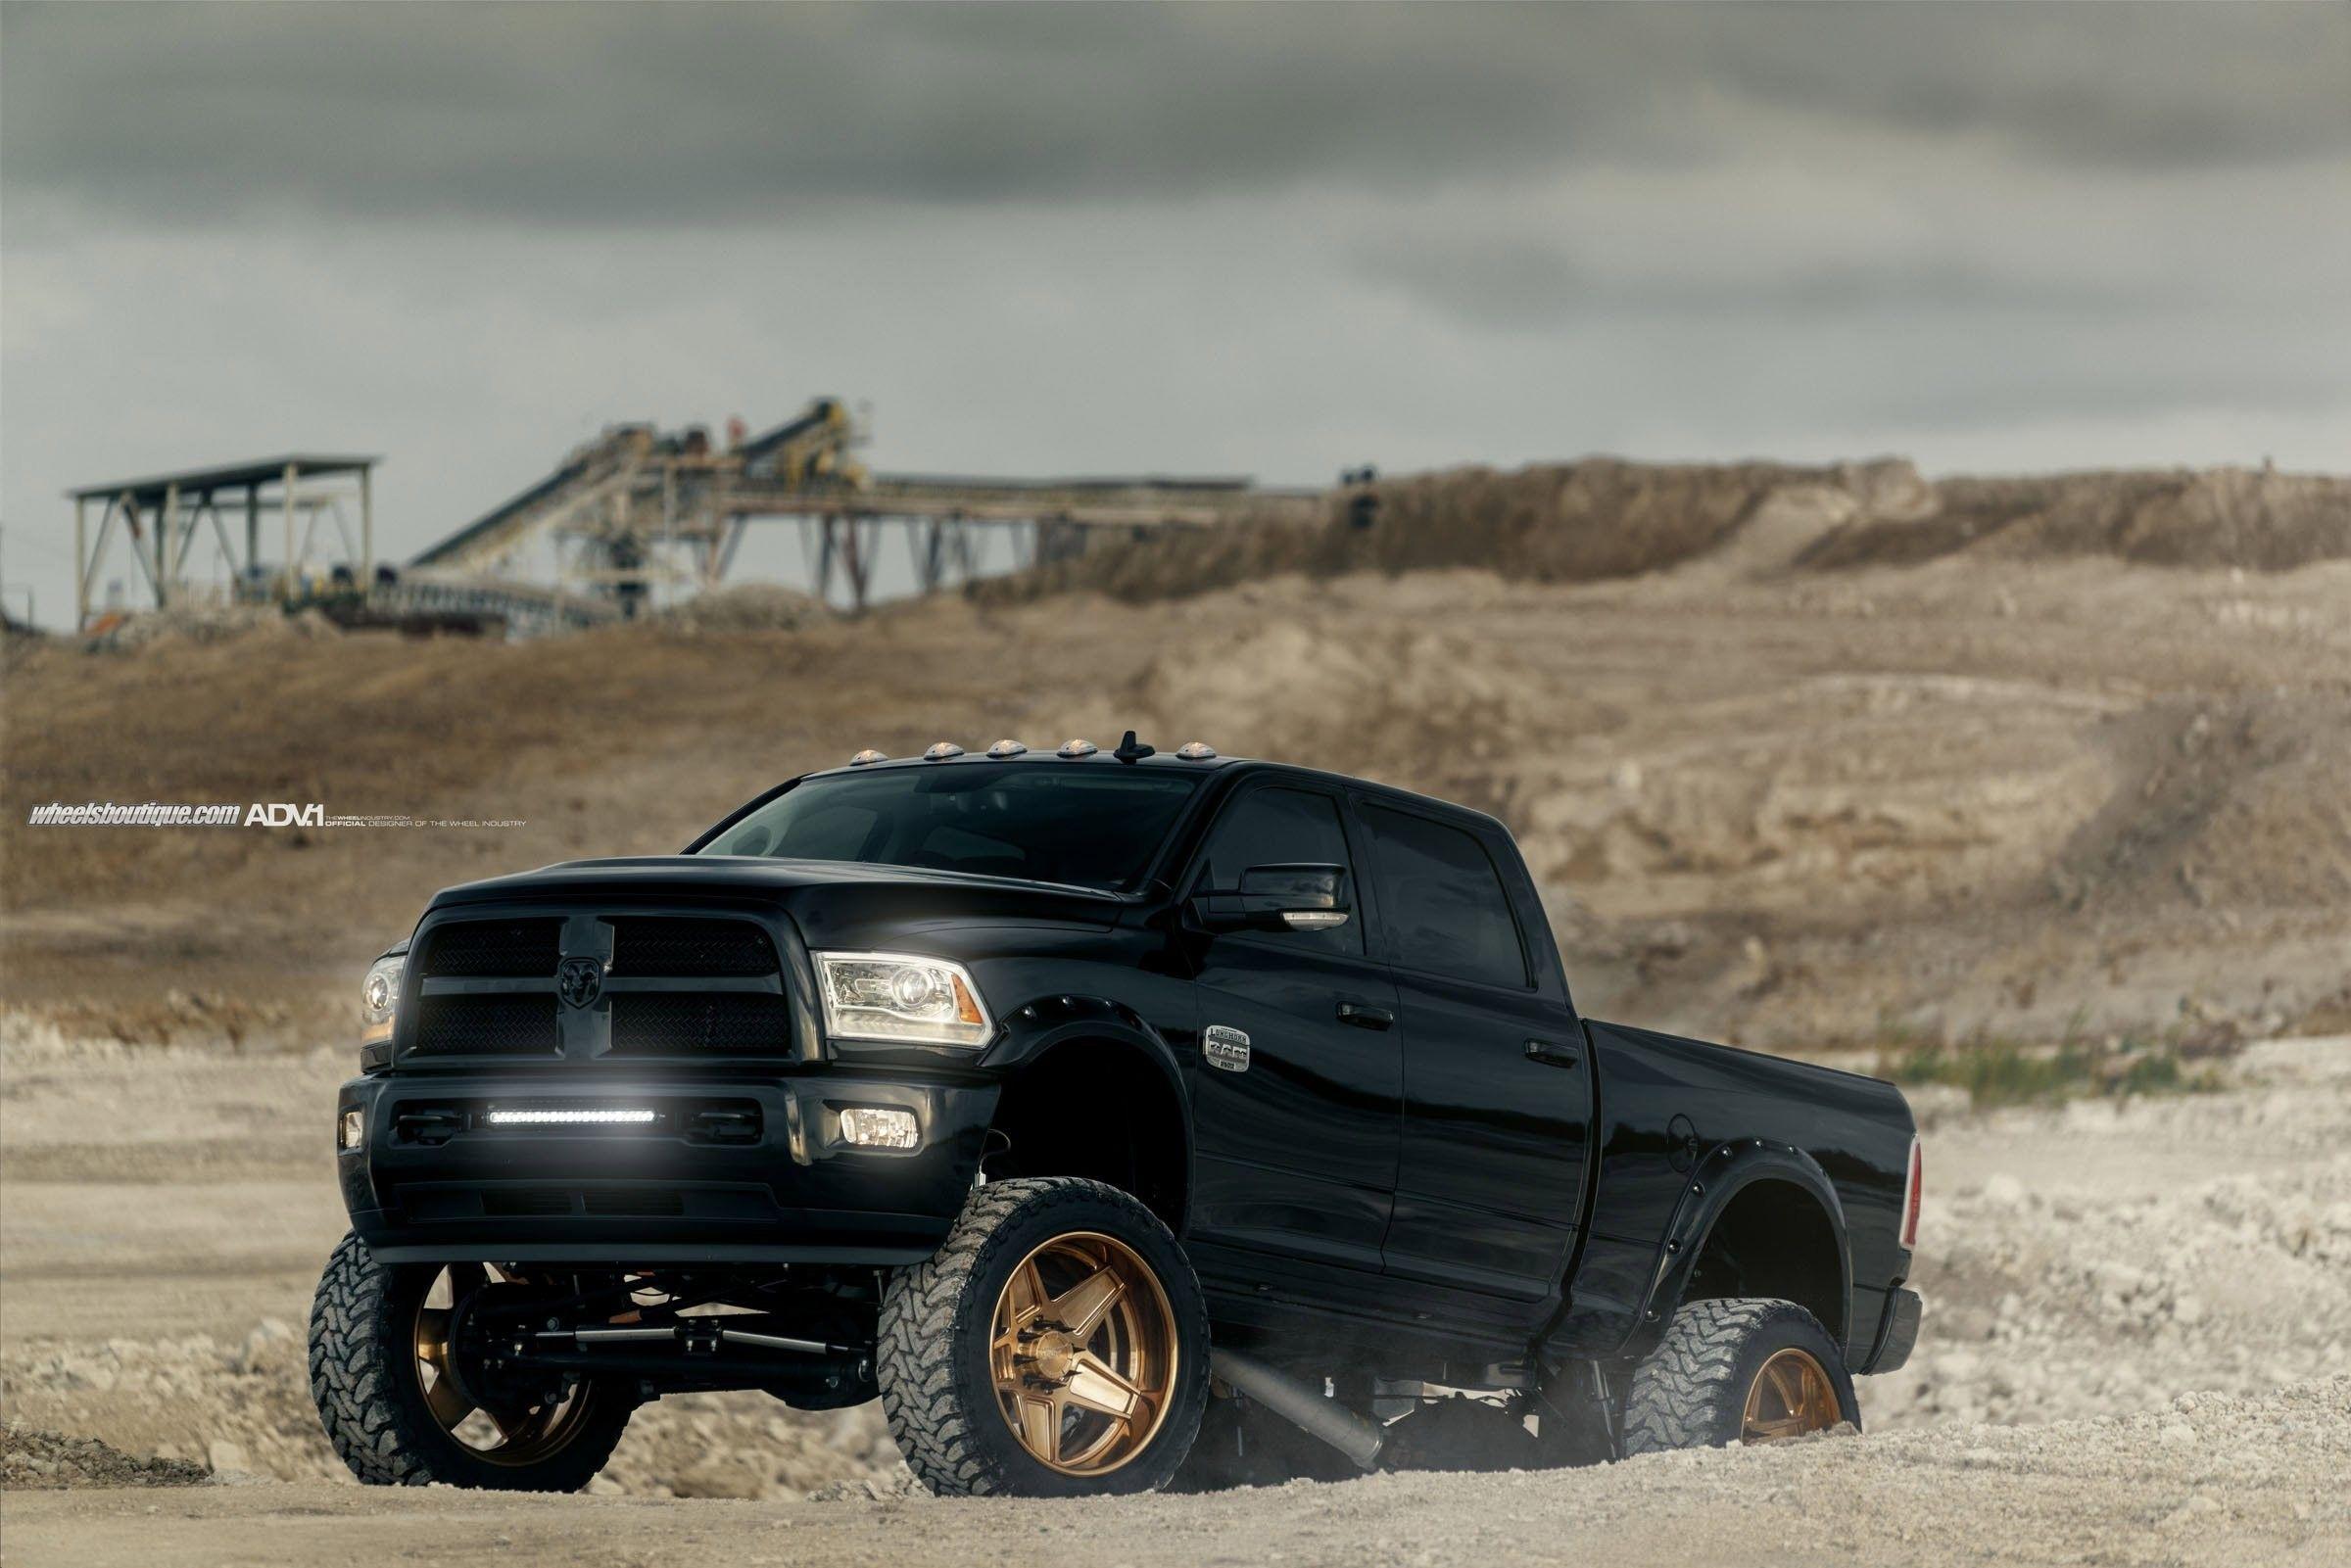 Lifted Trucks Wallpapers.